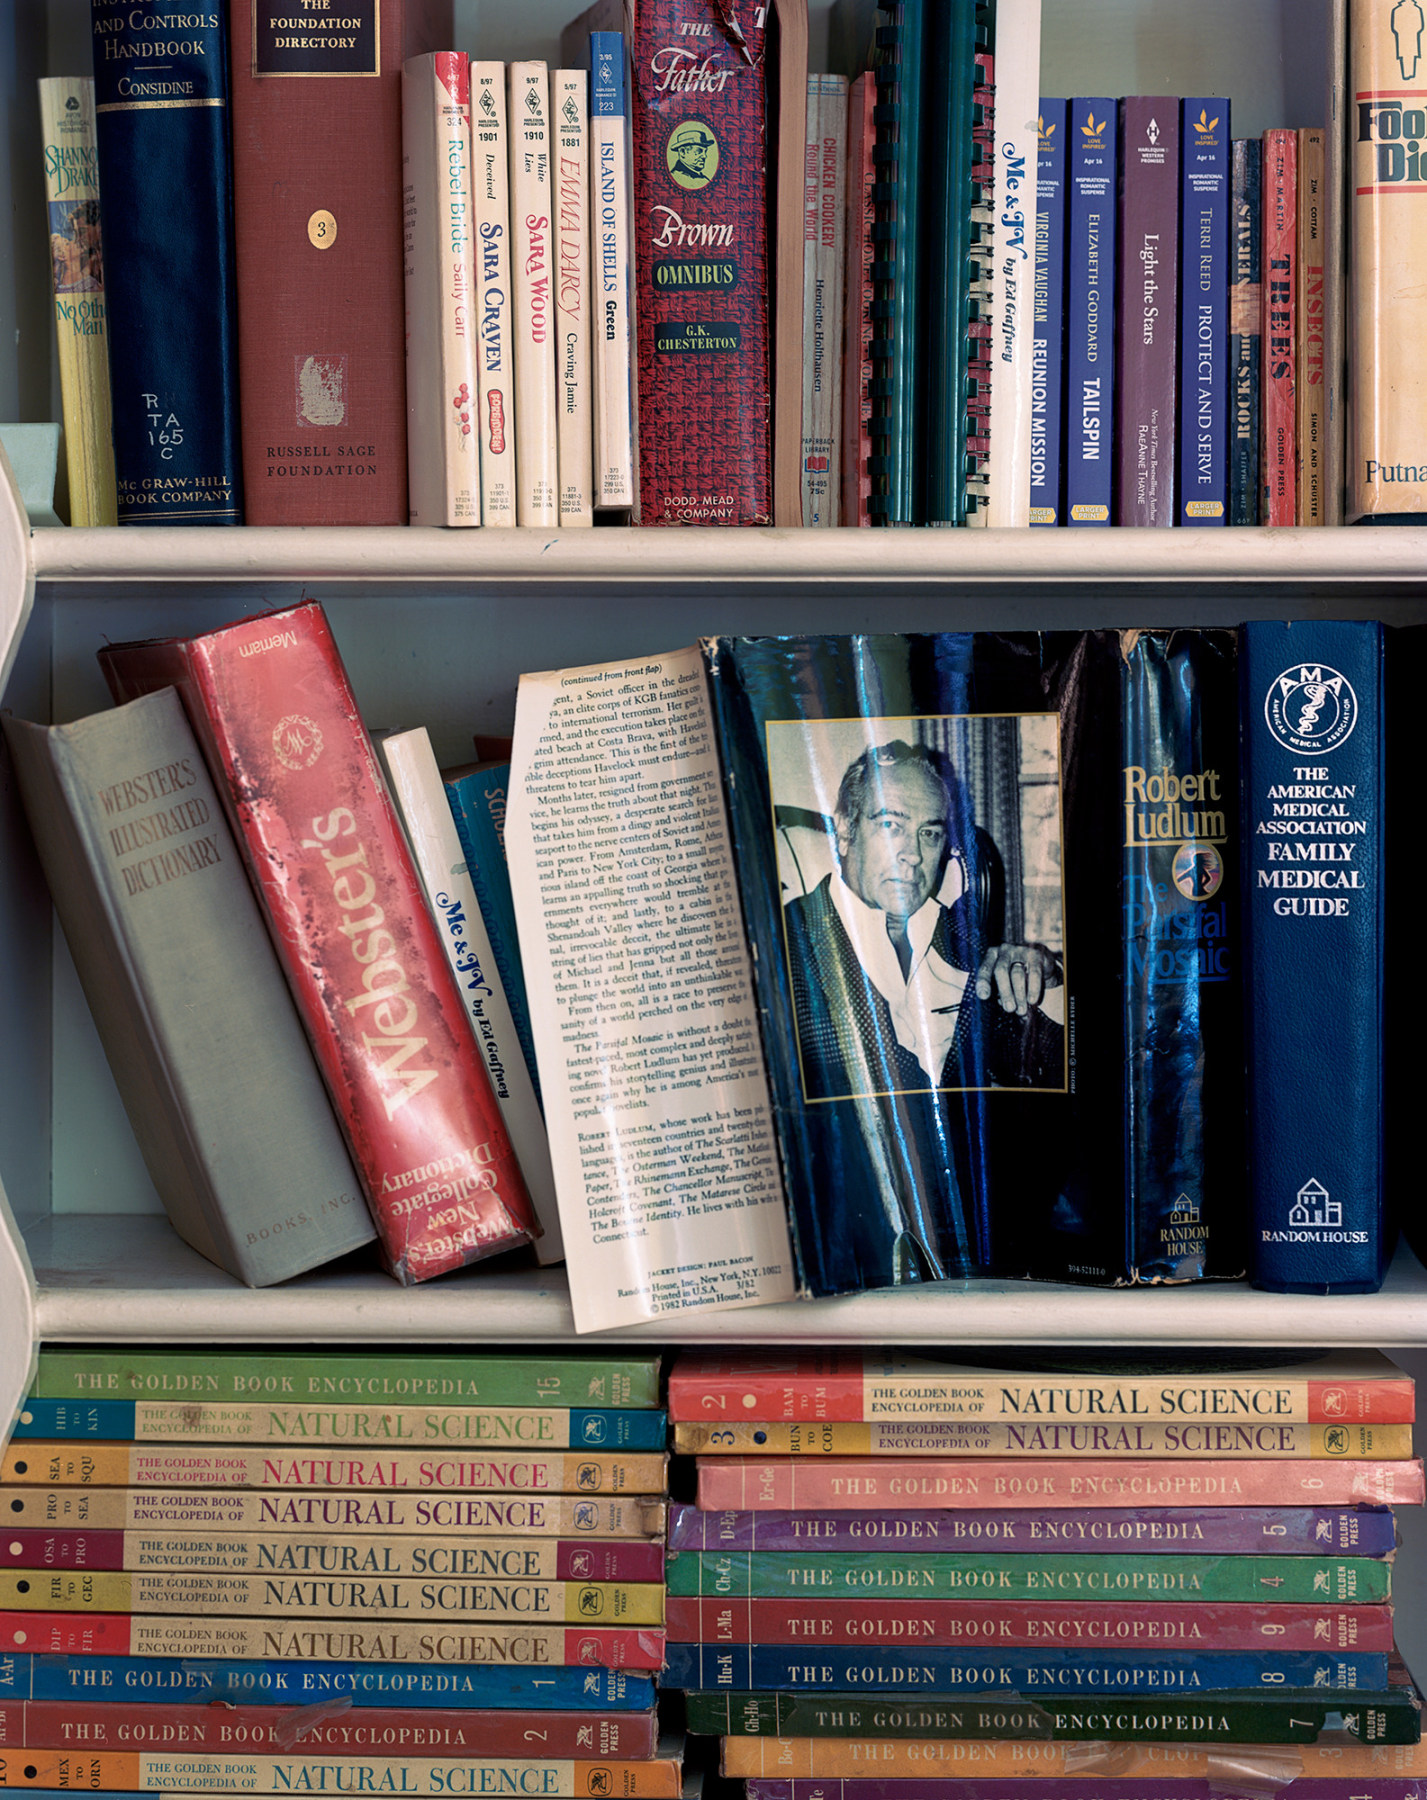 Color photograph of books on shelf, by Jade Doskow